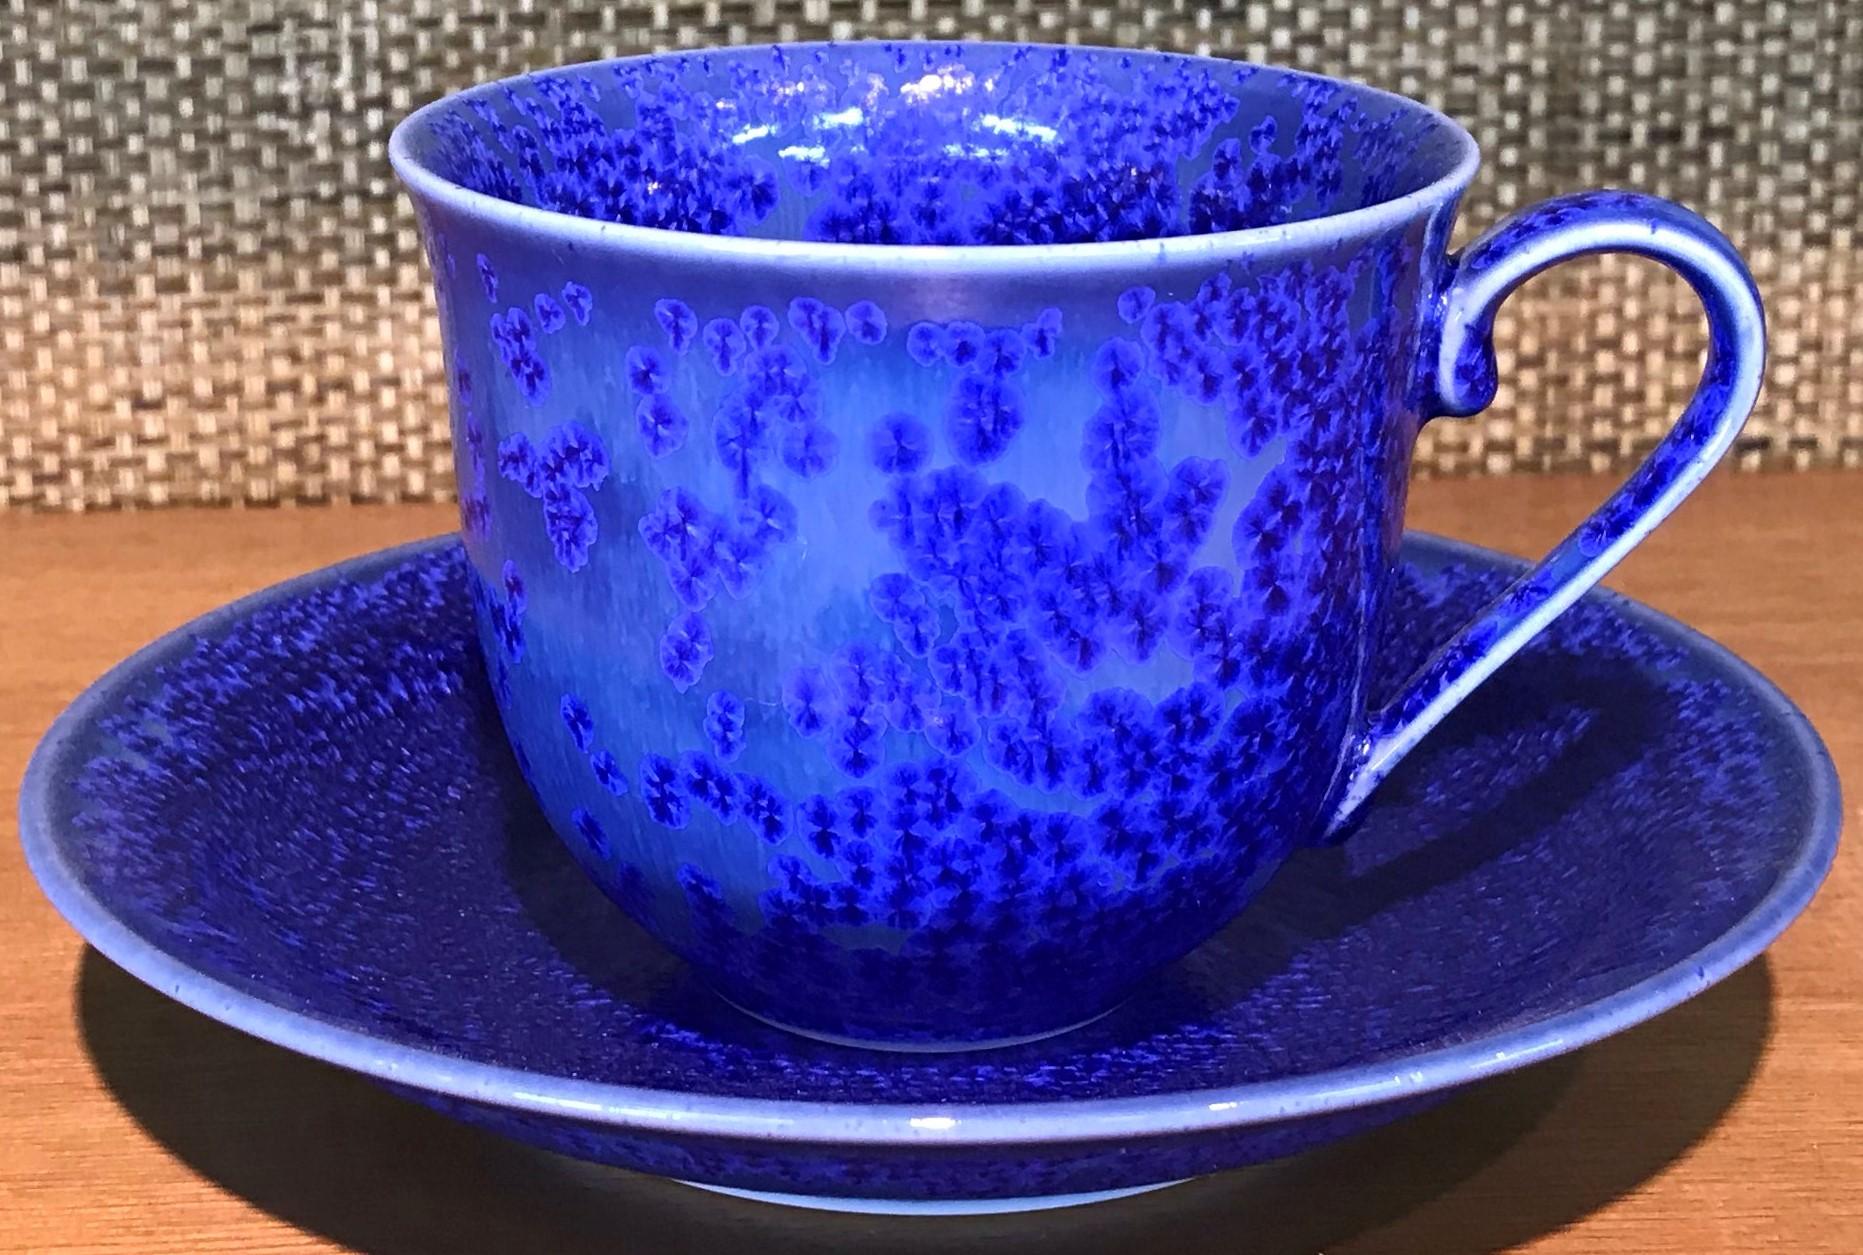 Japanese Hand-Glazed Blue Pink Porcelain Cup and Saucer by Master Artist 2